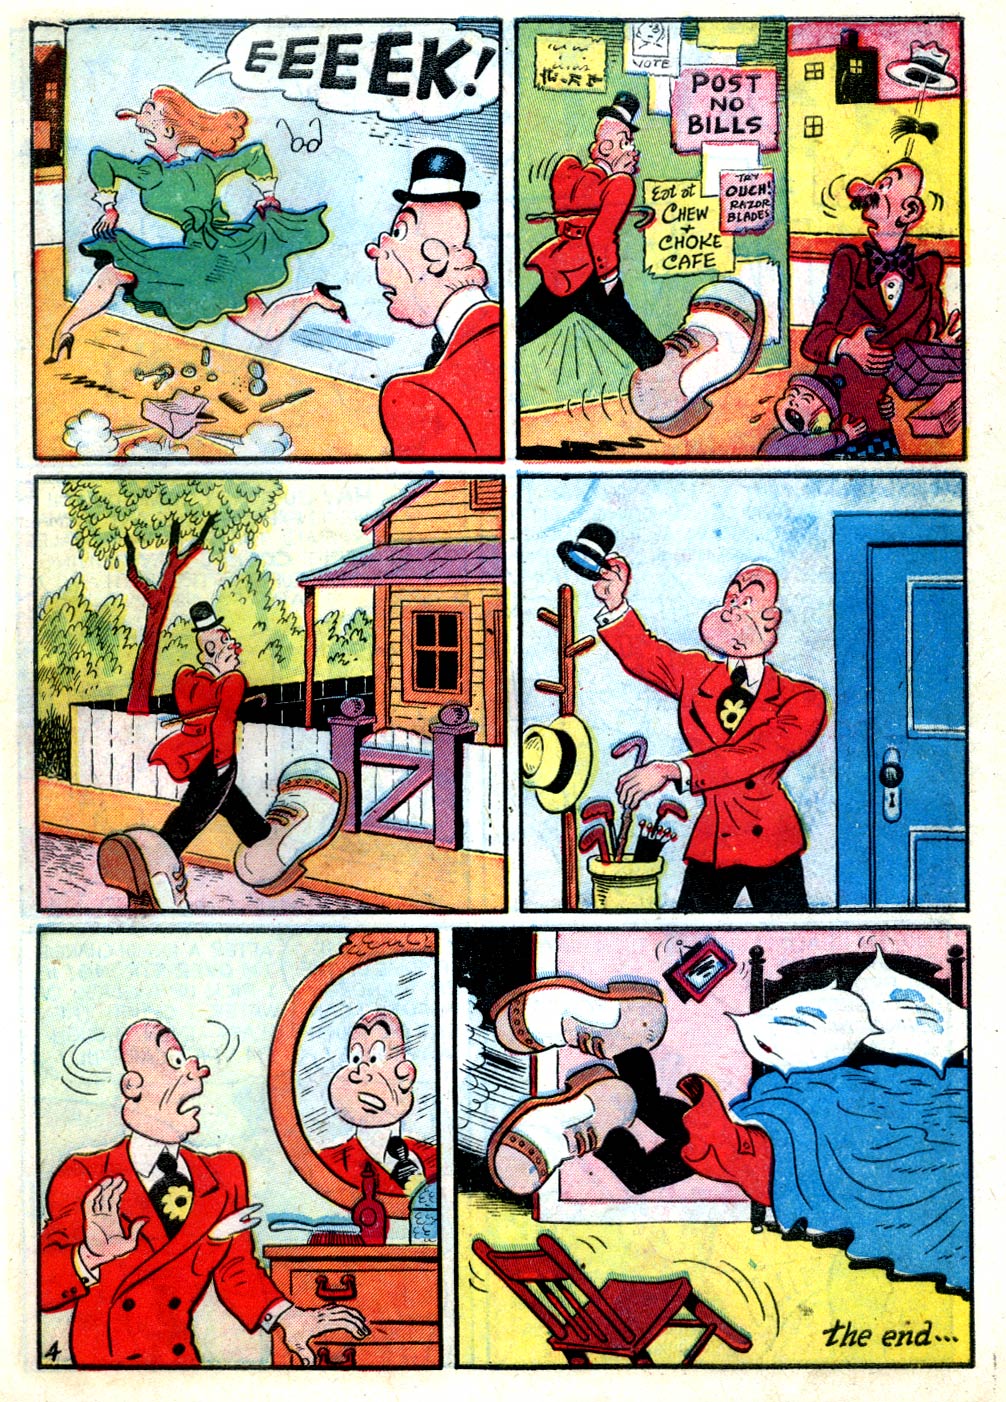 Boody The Bizarre Comics Art of Boody Rogers review